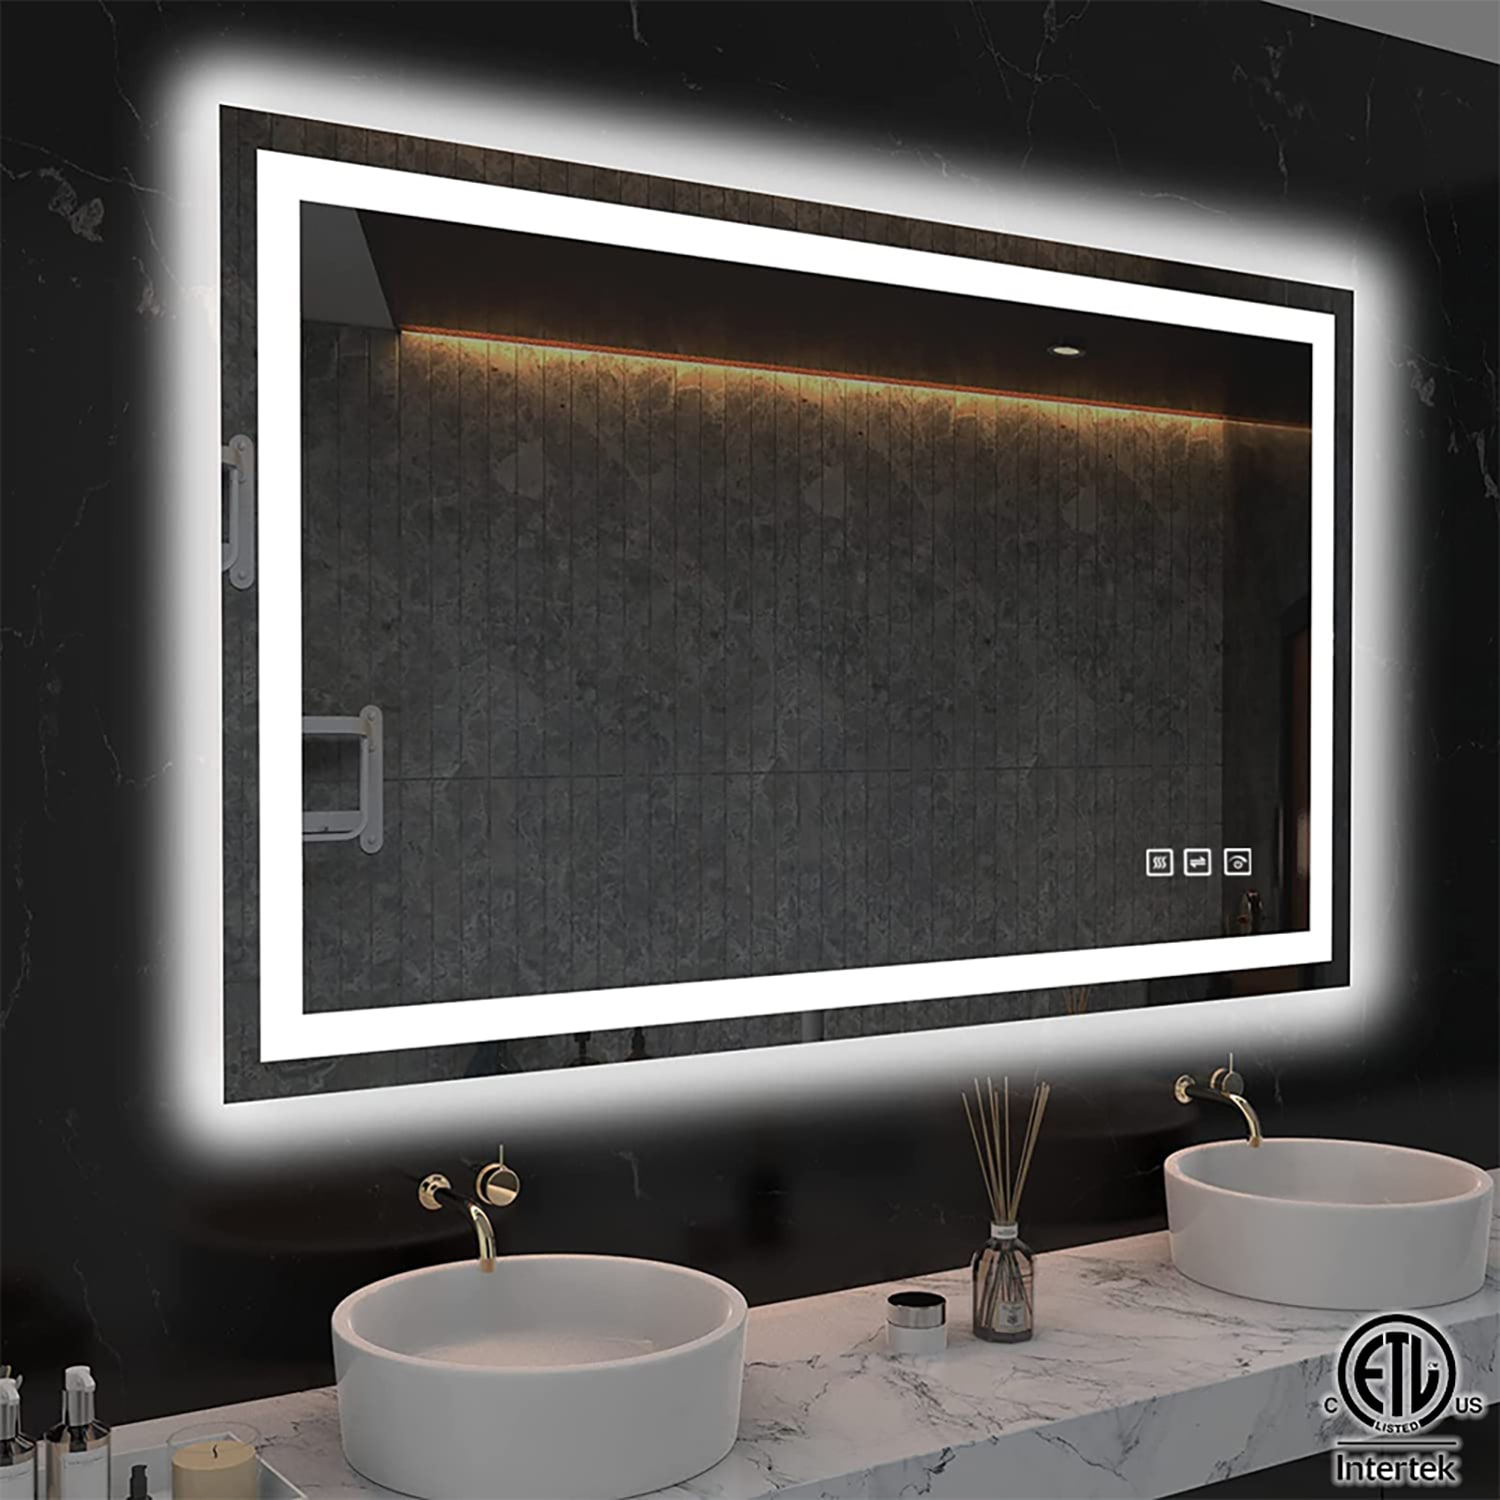 ExBrite 72 x 36 inch LED Bathroom Large Light LED Mirror,Anti Fog,Dimmable,Dual Lighting Mode,Tempered Glass